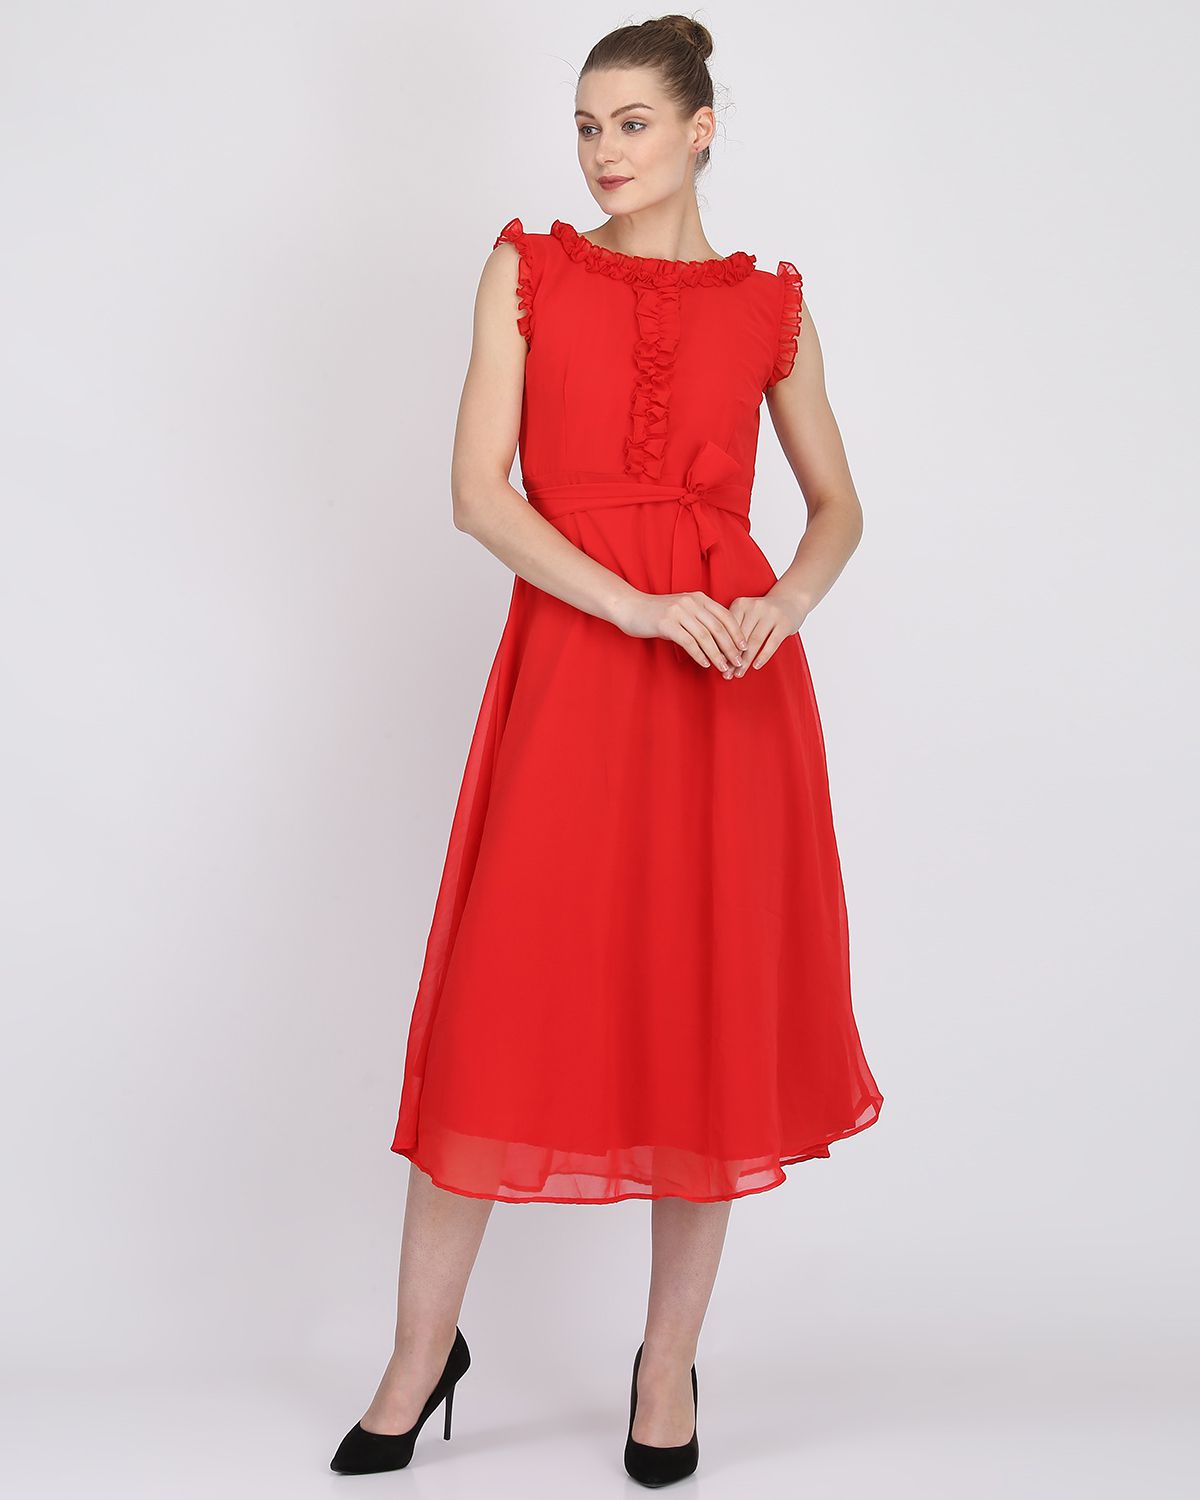 Raghumaya Georgette Red Fit And Flare Dress